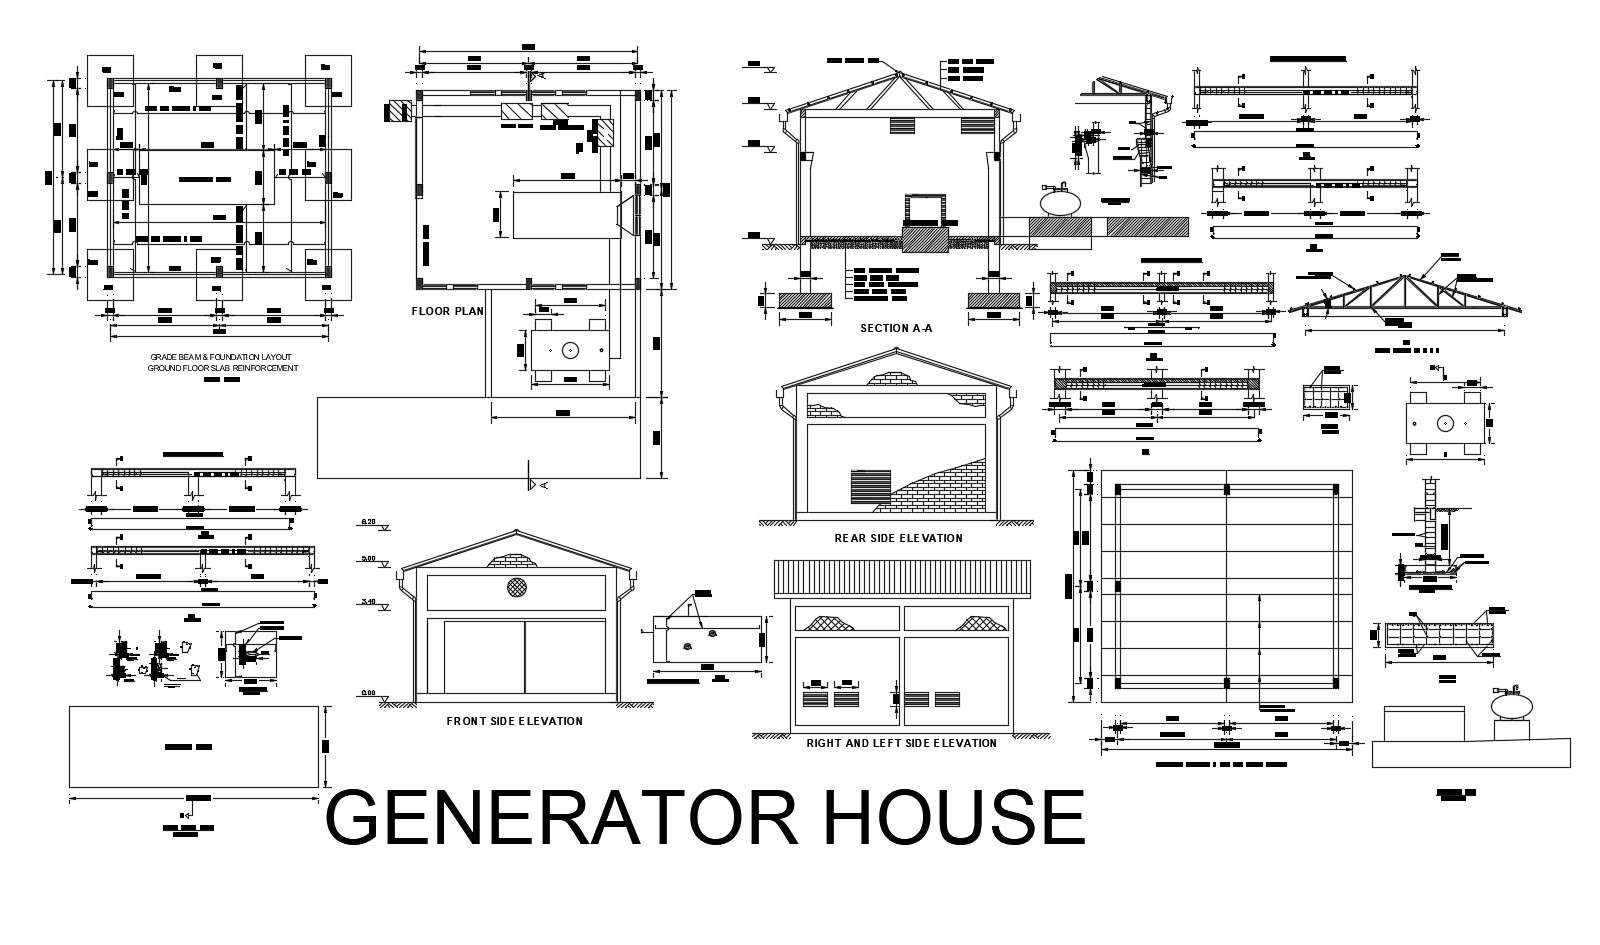 Goneryl canal Surprised Floor plan of generator house 8.10mtr x 7.04mtr with elevation and section  in dwg file - Cadbull